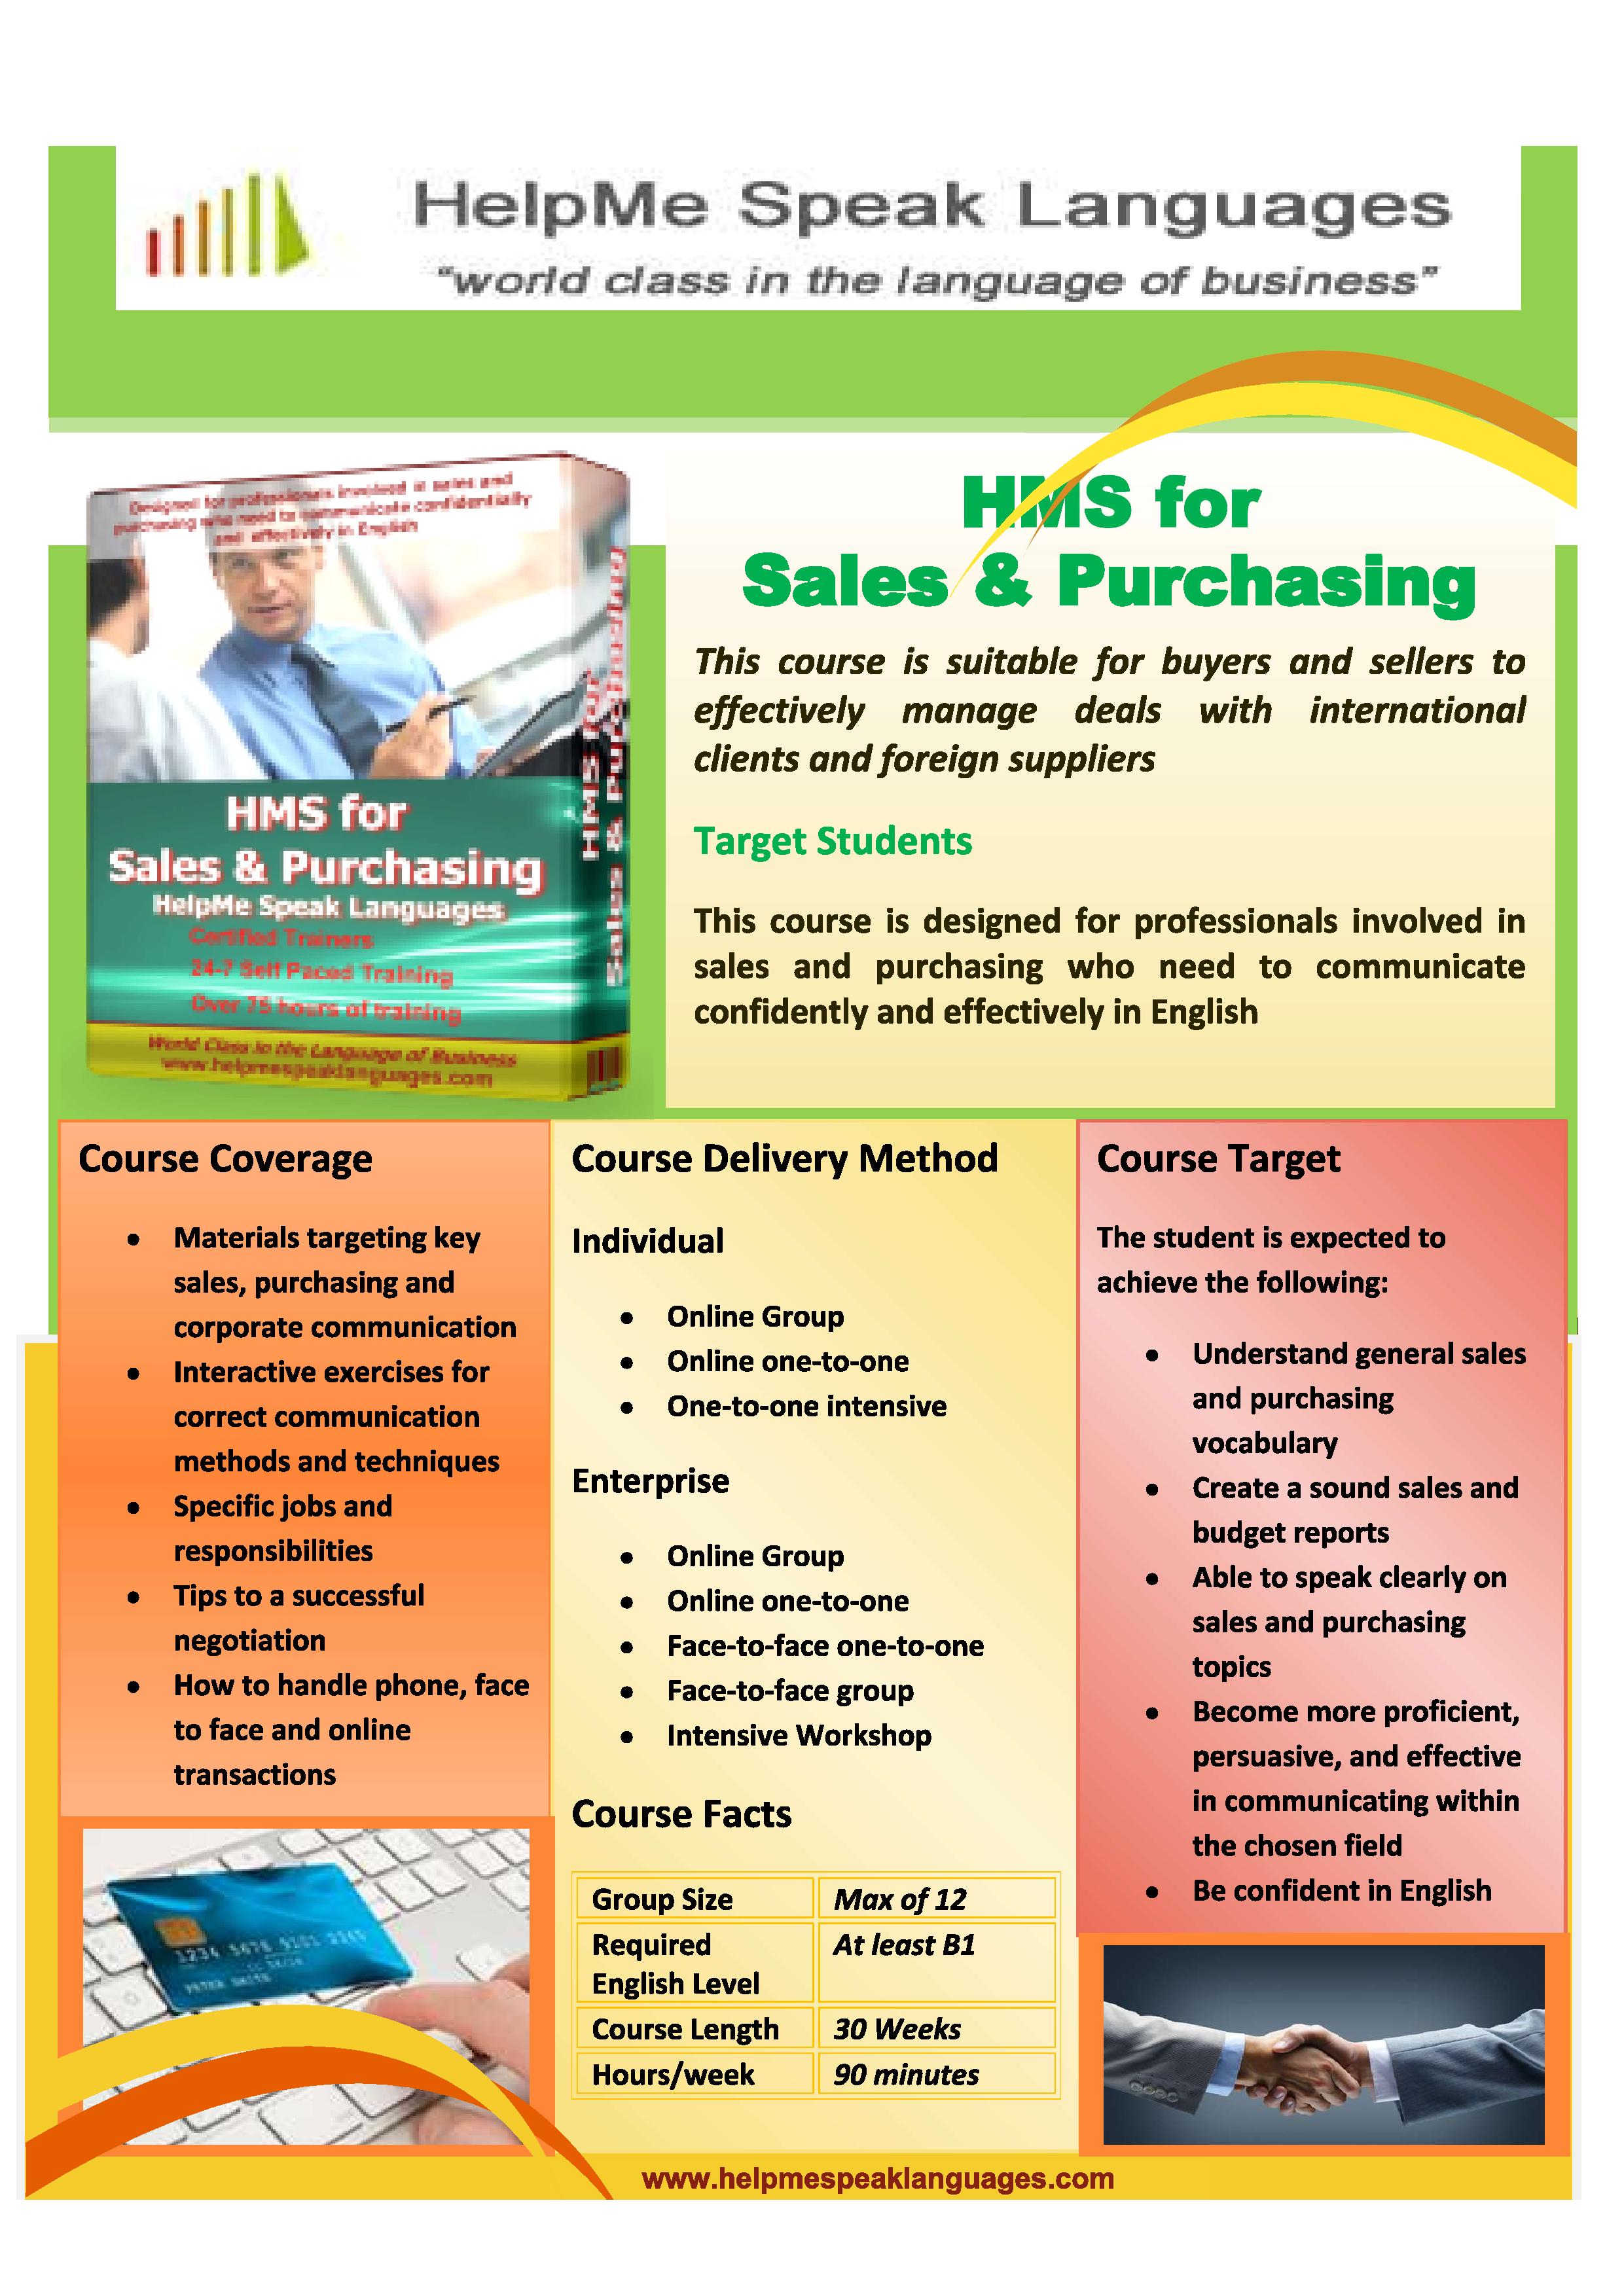 hms-for-sales-page-001